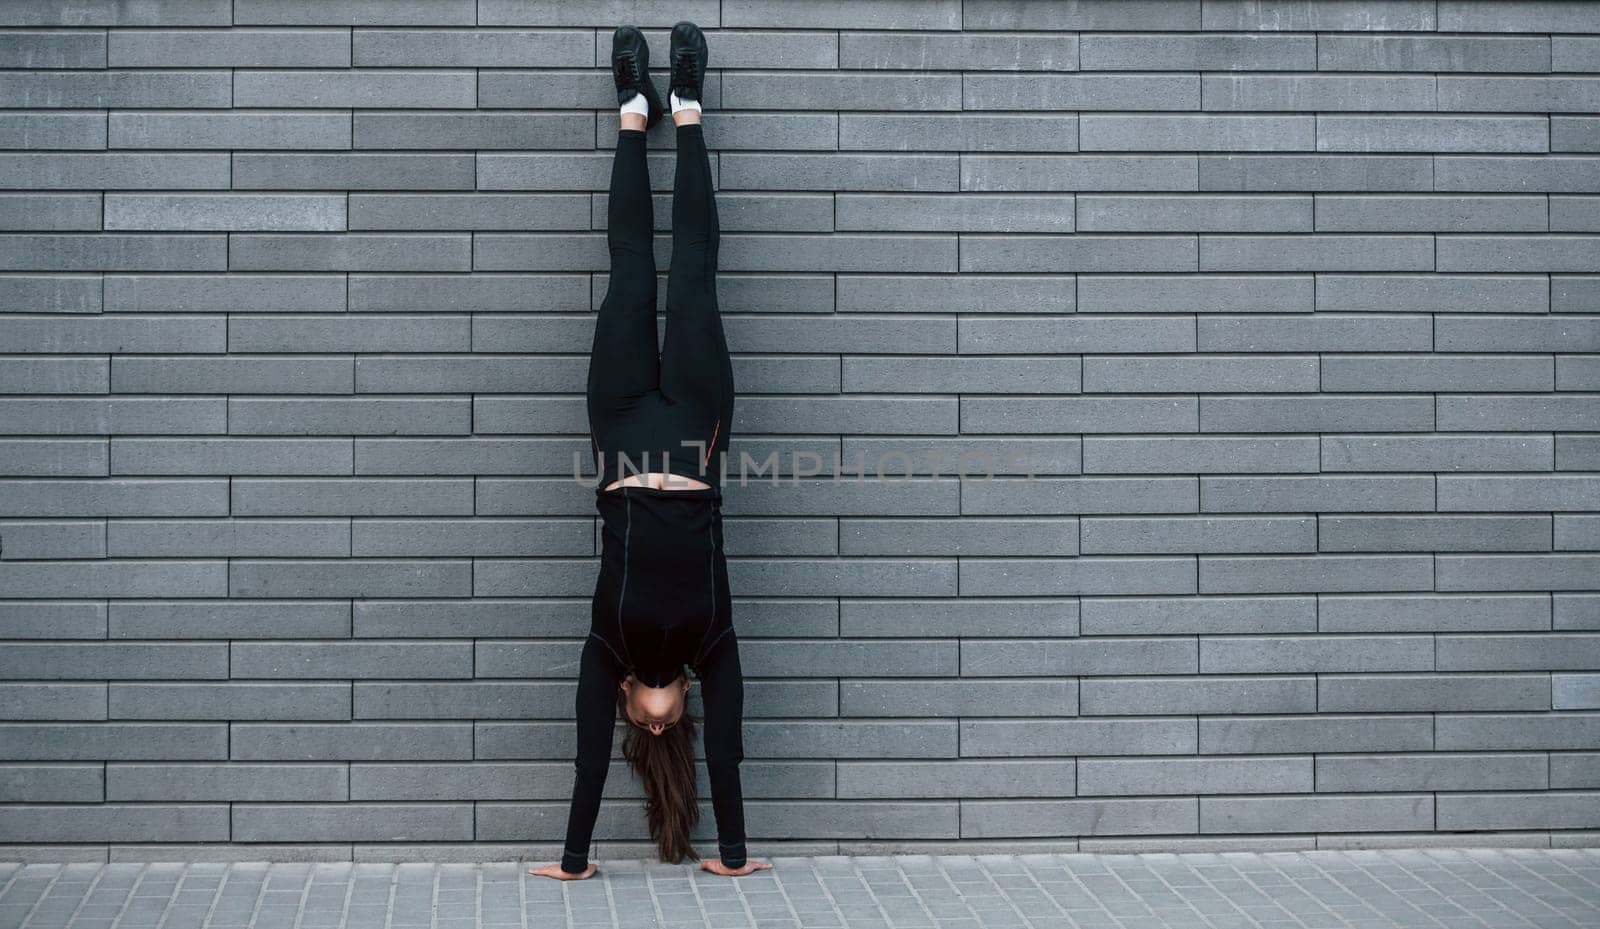 Young sportive girl in black sportswear doing hard handstand exercises outdoors near gray wall.